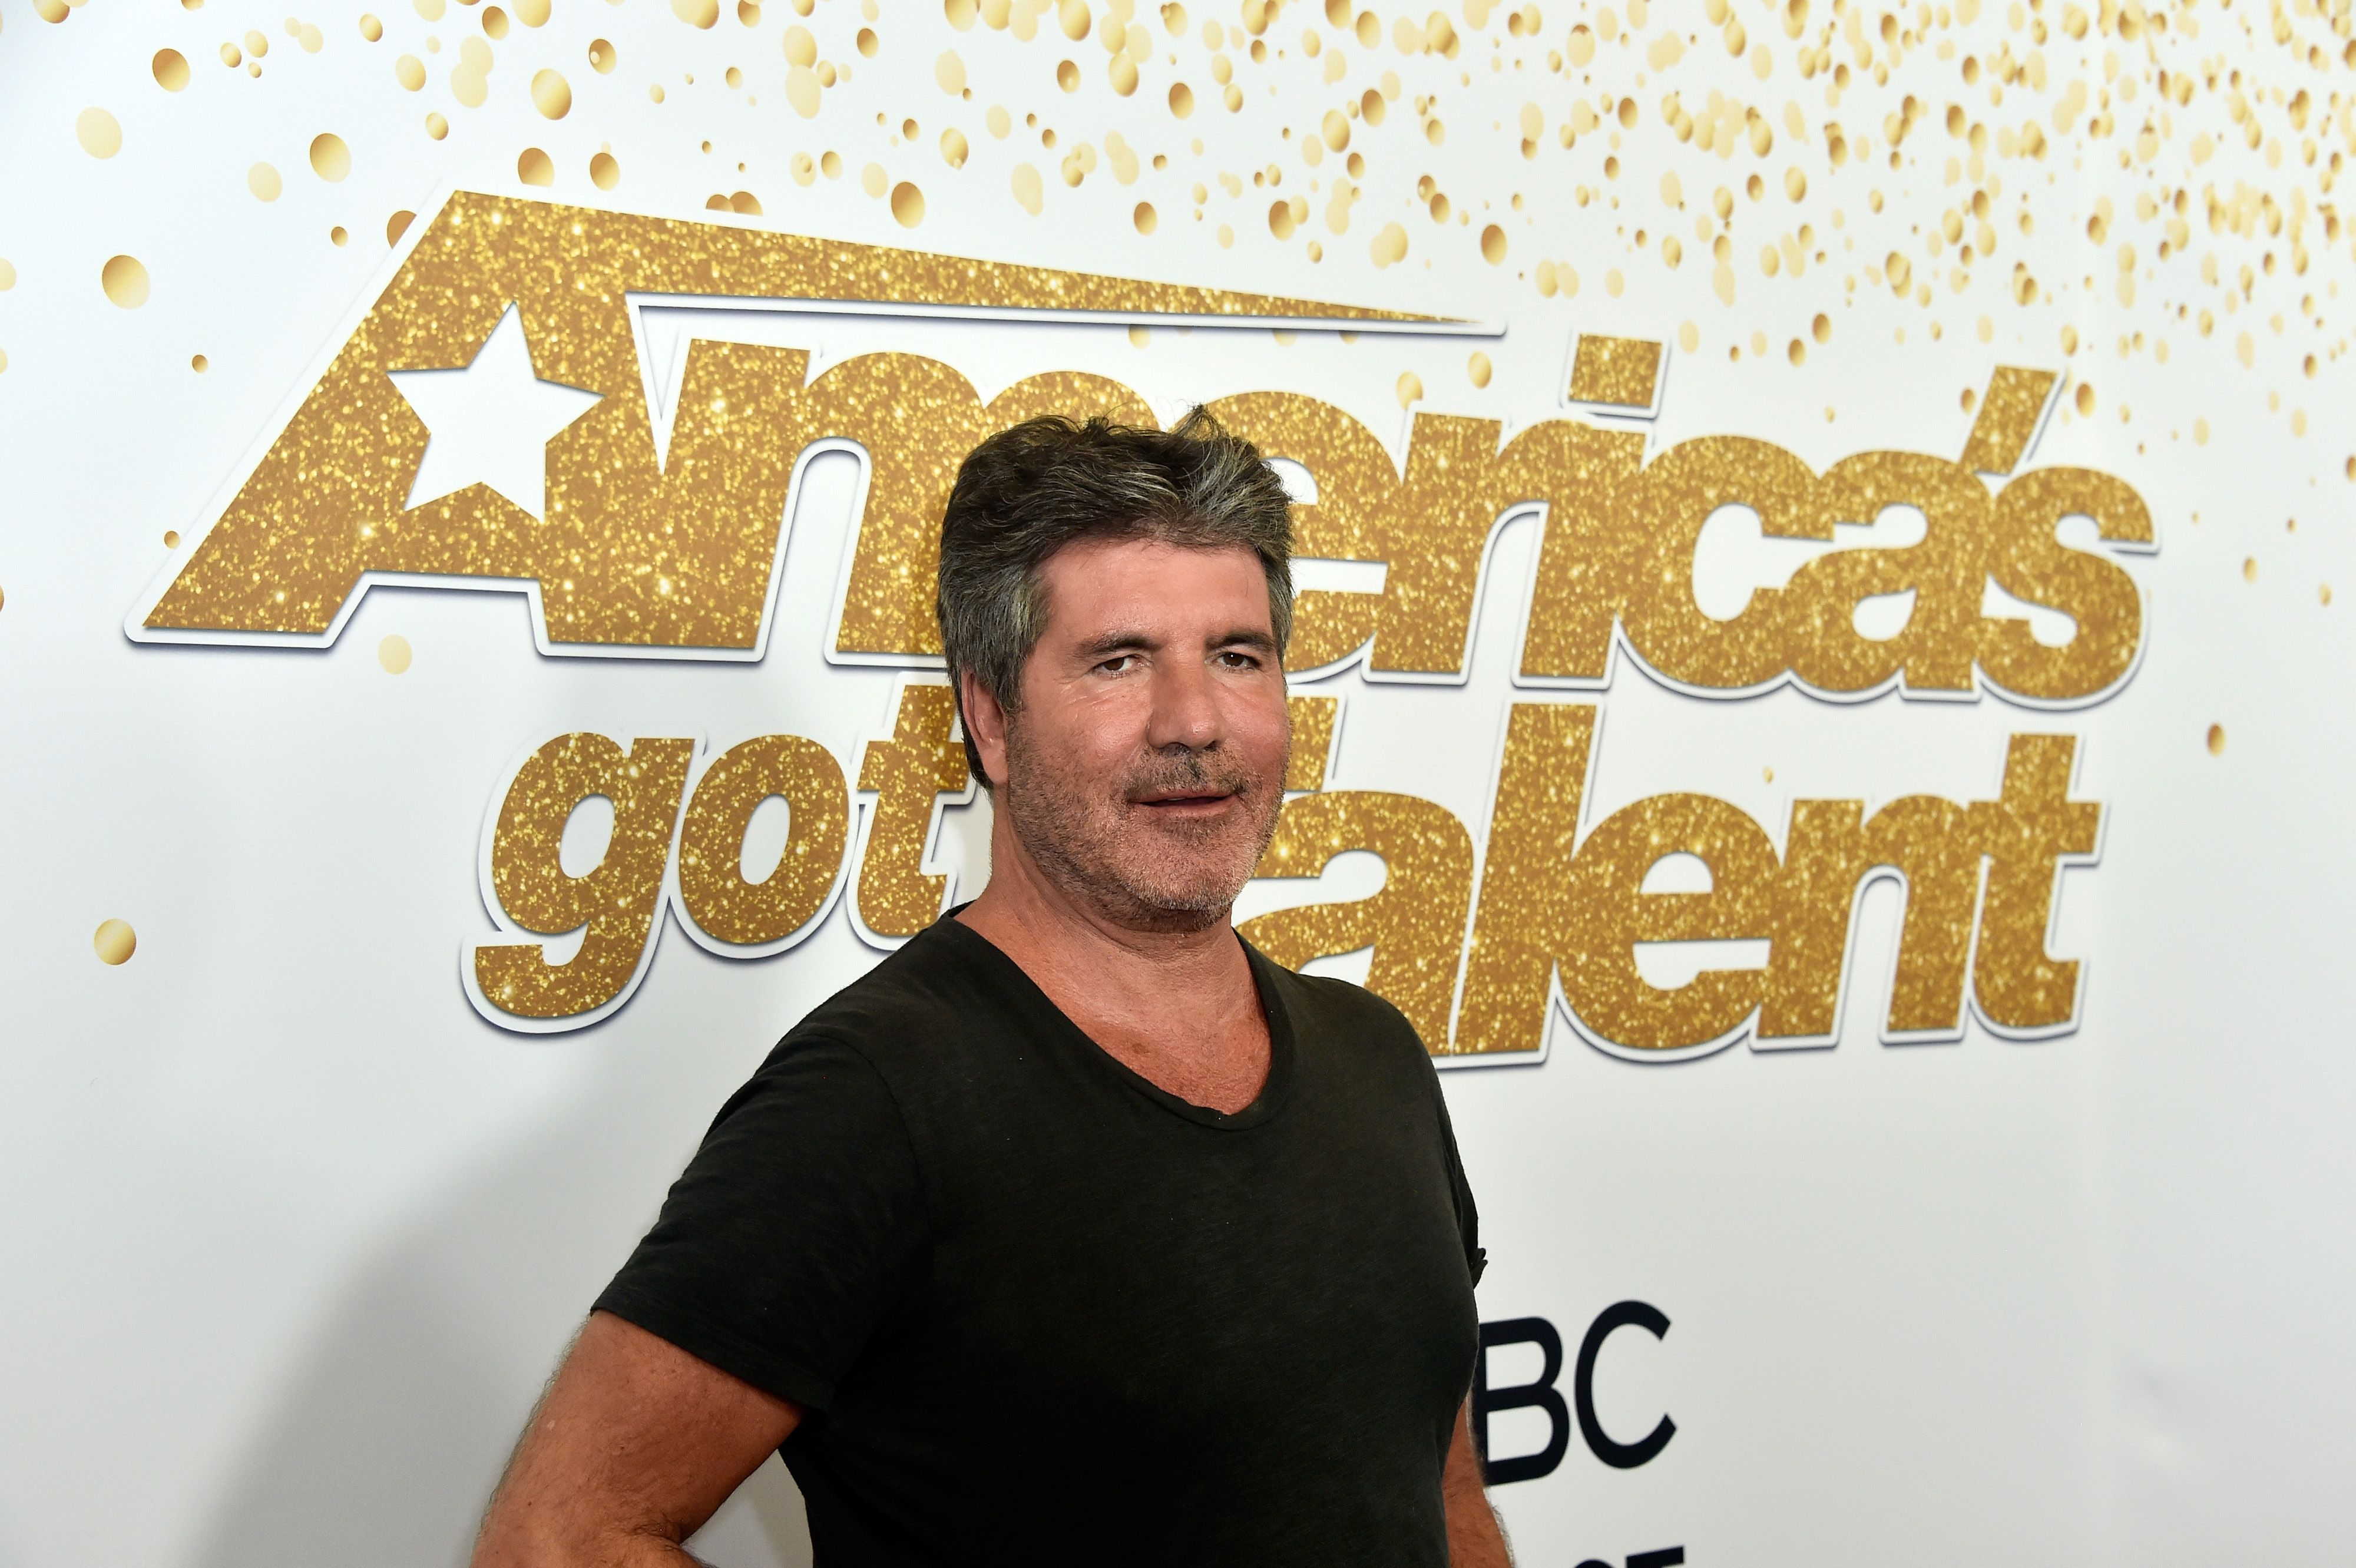 Simon Cowell at the "America's Got Talent" season 13 live show on August 14, 2018, in Hollywood, California | Photo: Frazer Harrison/Getty Images